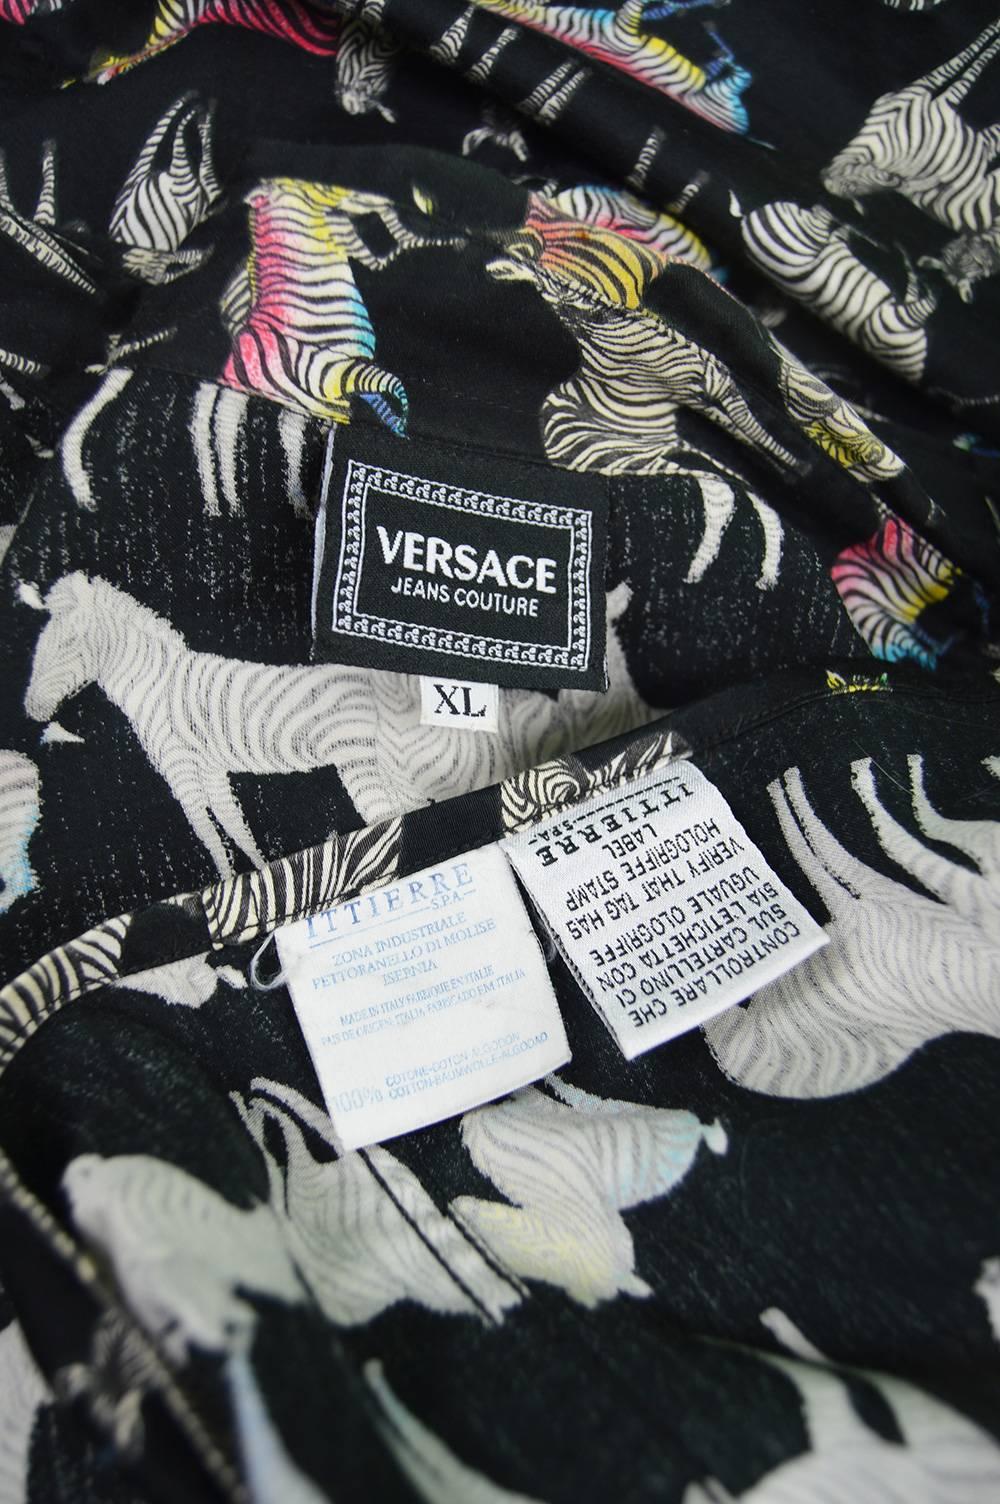 Versace Jeans Couture Rainbow Zebra Men's Cotton Shirt. Made in Italy, 1990s 2